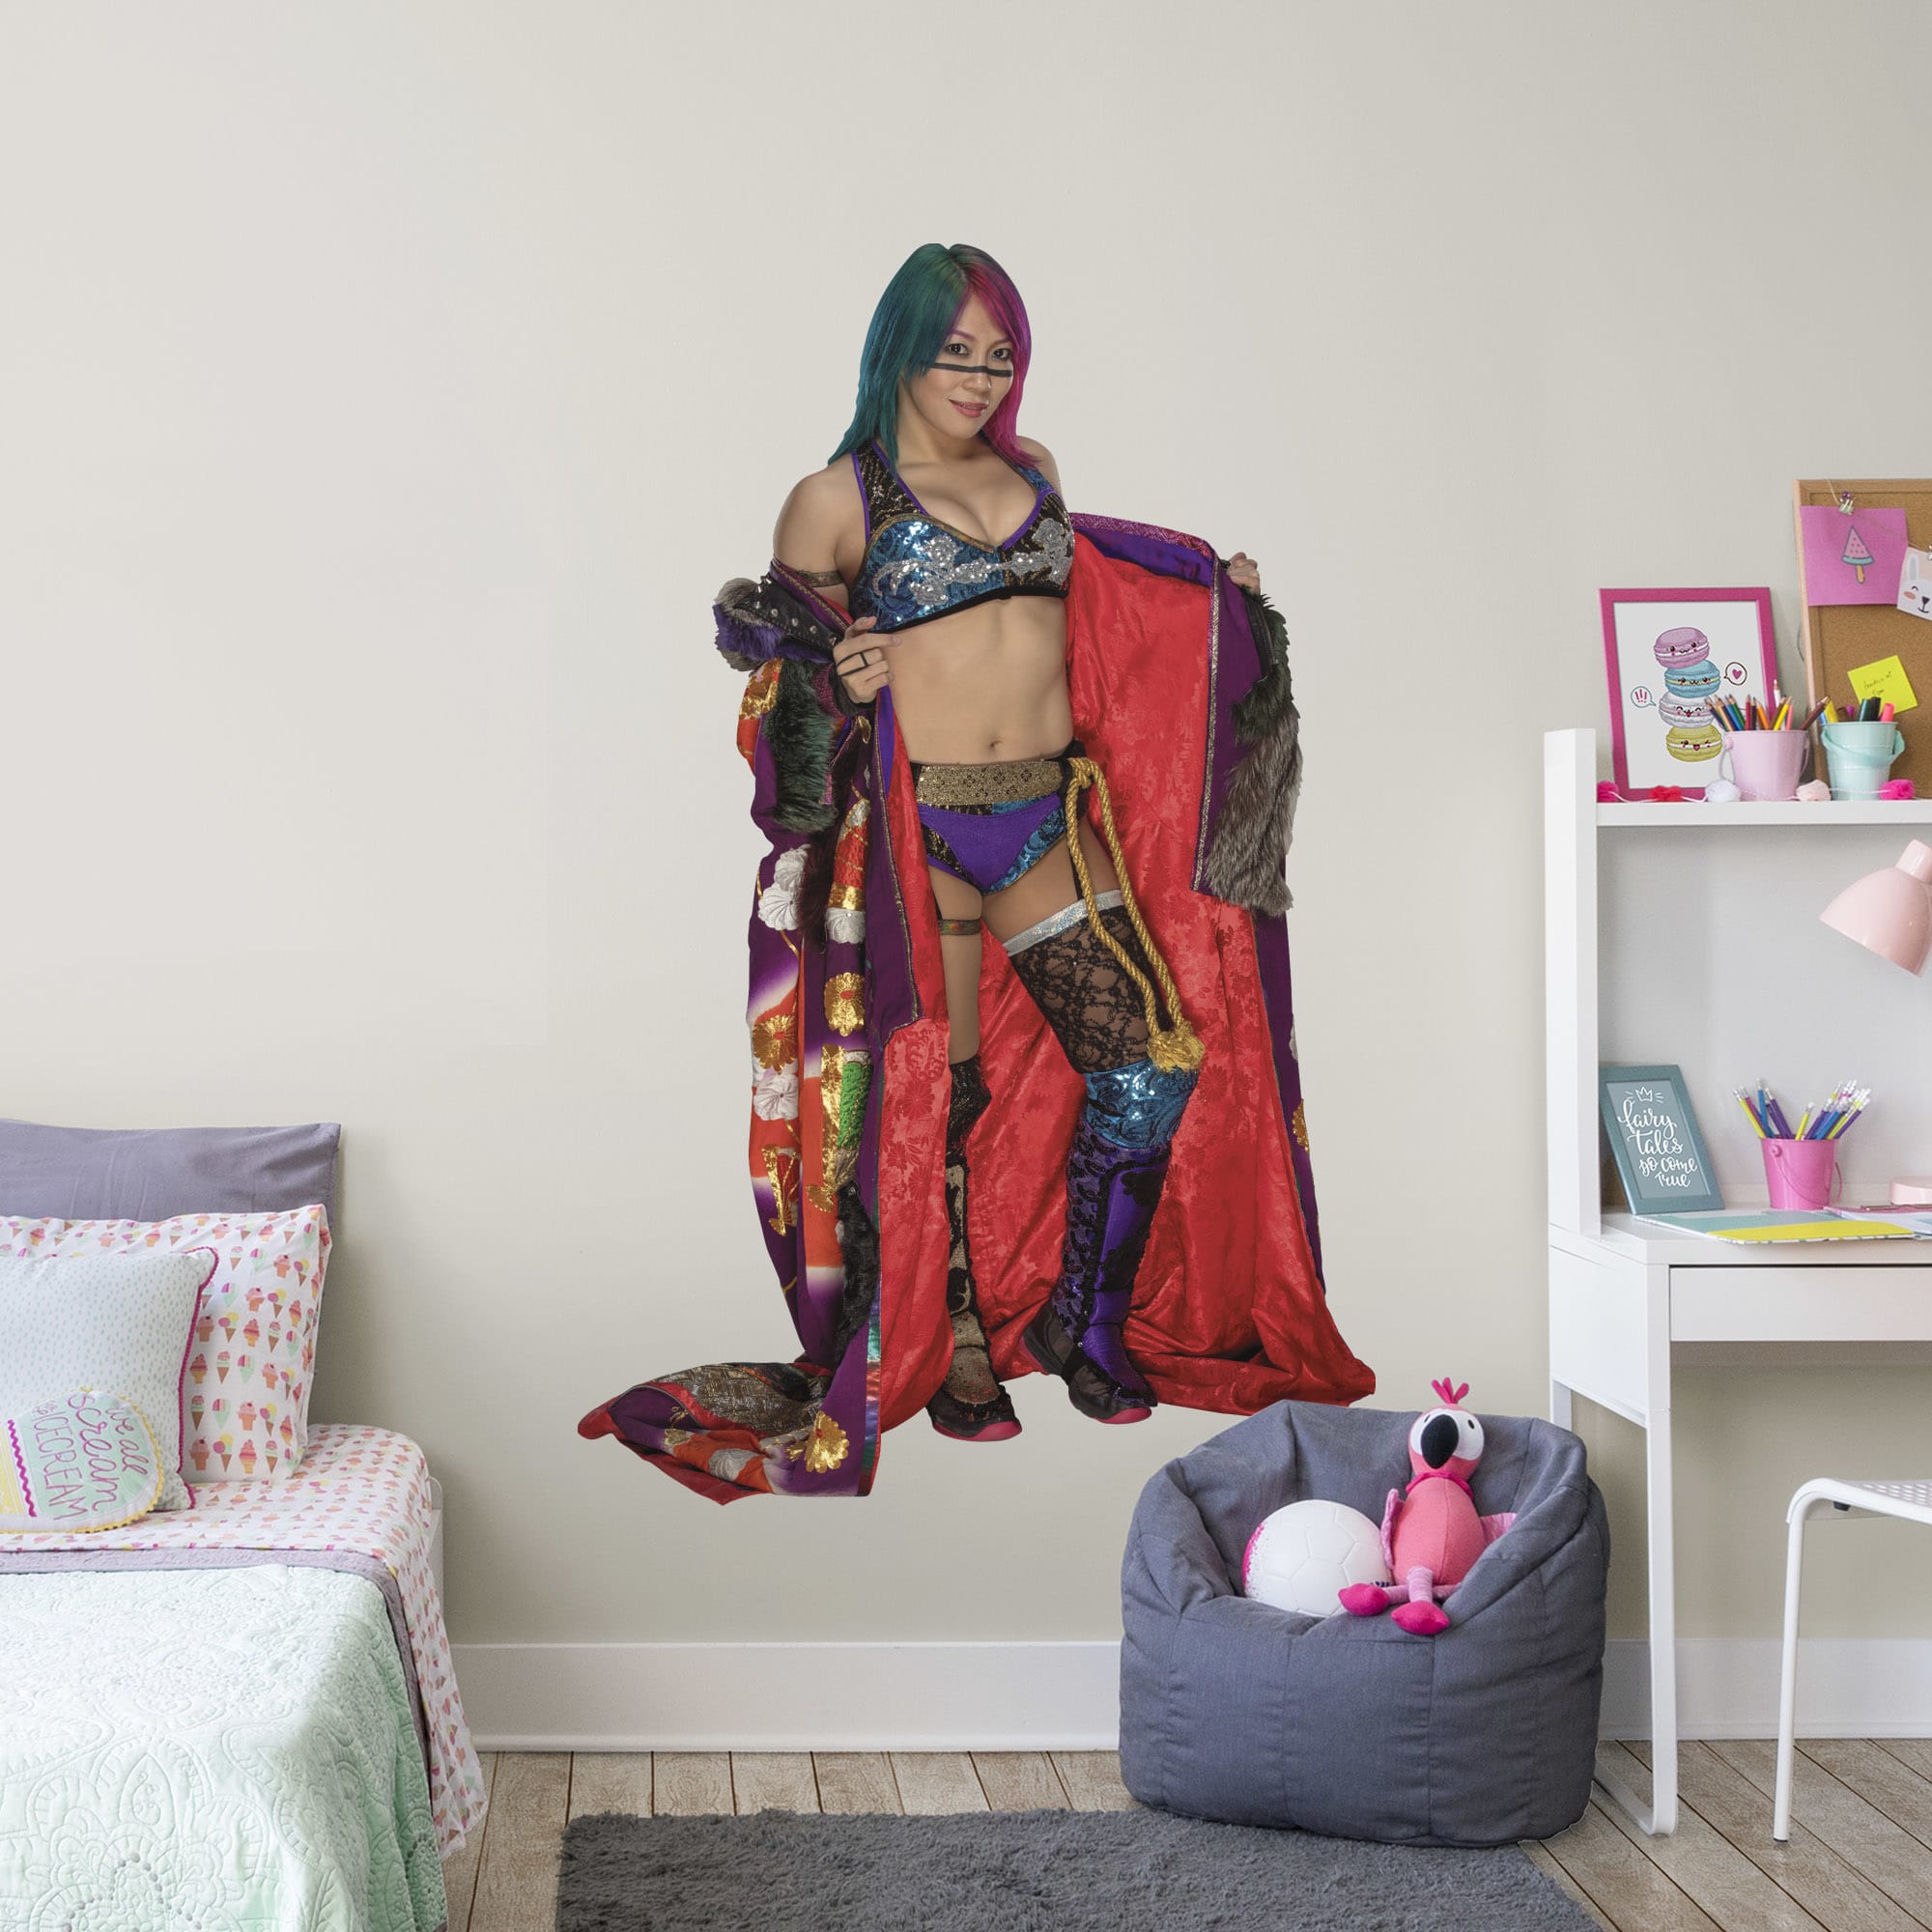 Asuka for WWE - Officially Licensed Removable Wall Decal Life-Size Superstar + 2 Decals (45"W x 72"H) by Fathead | Vinyl